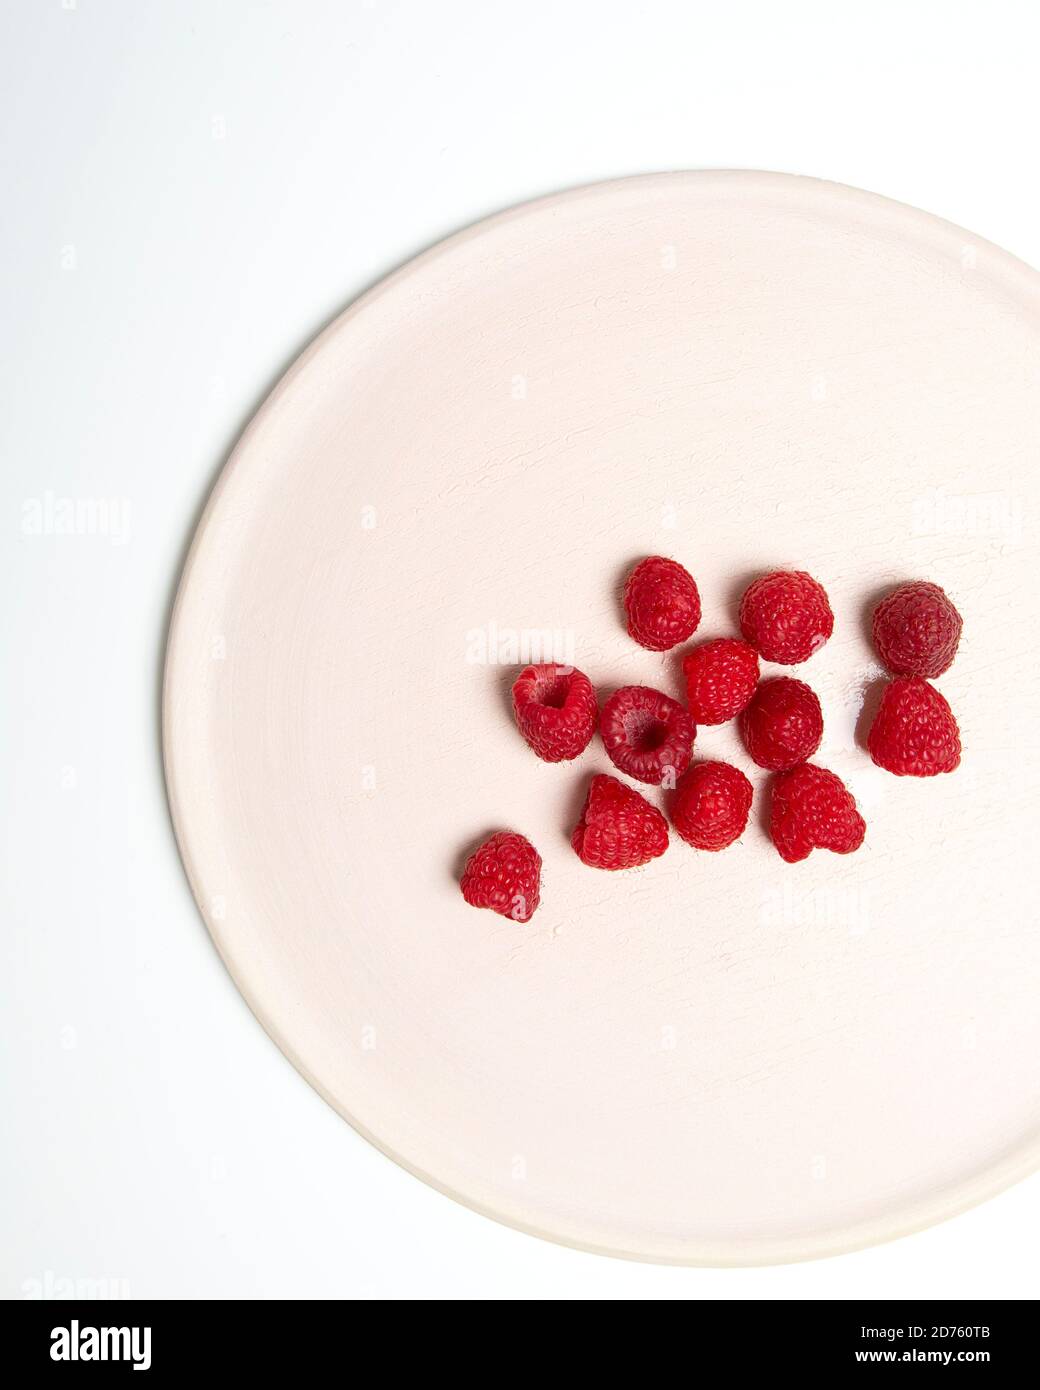 High Angle View of Raspberries on Cropped White Plate Stock Photo